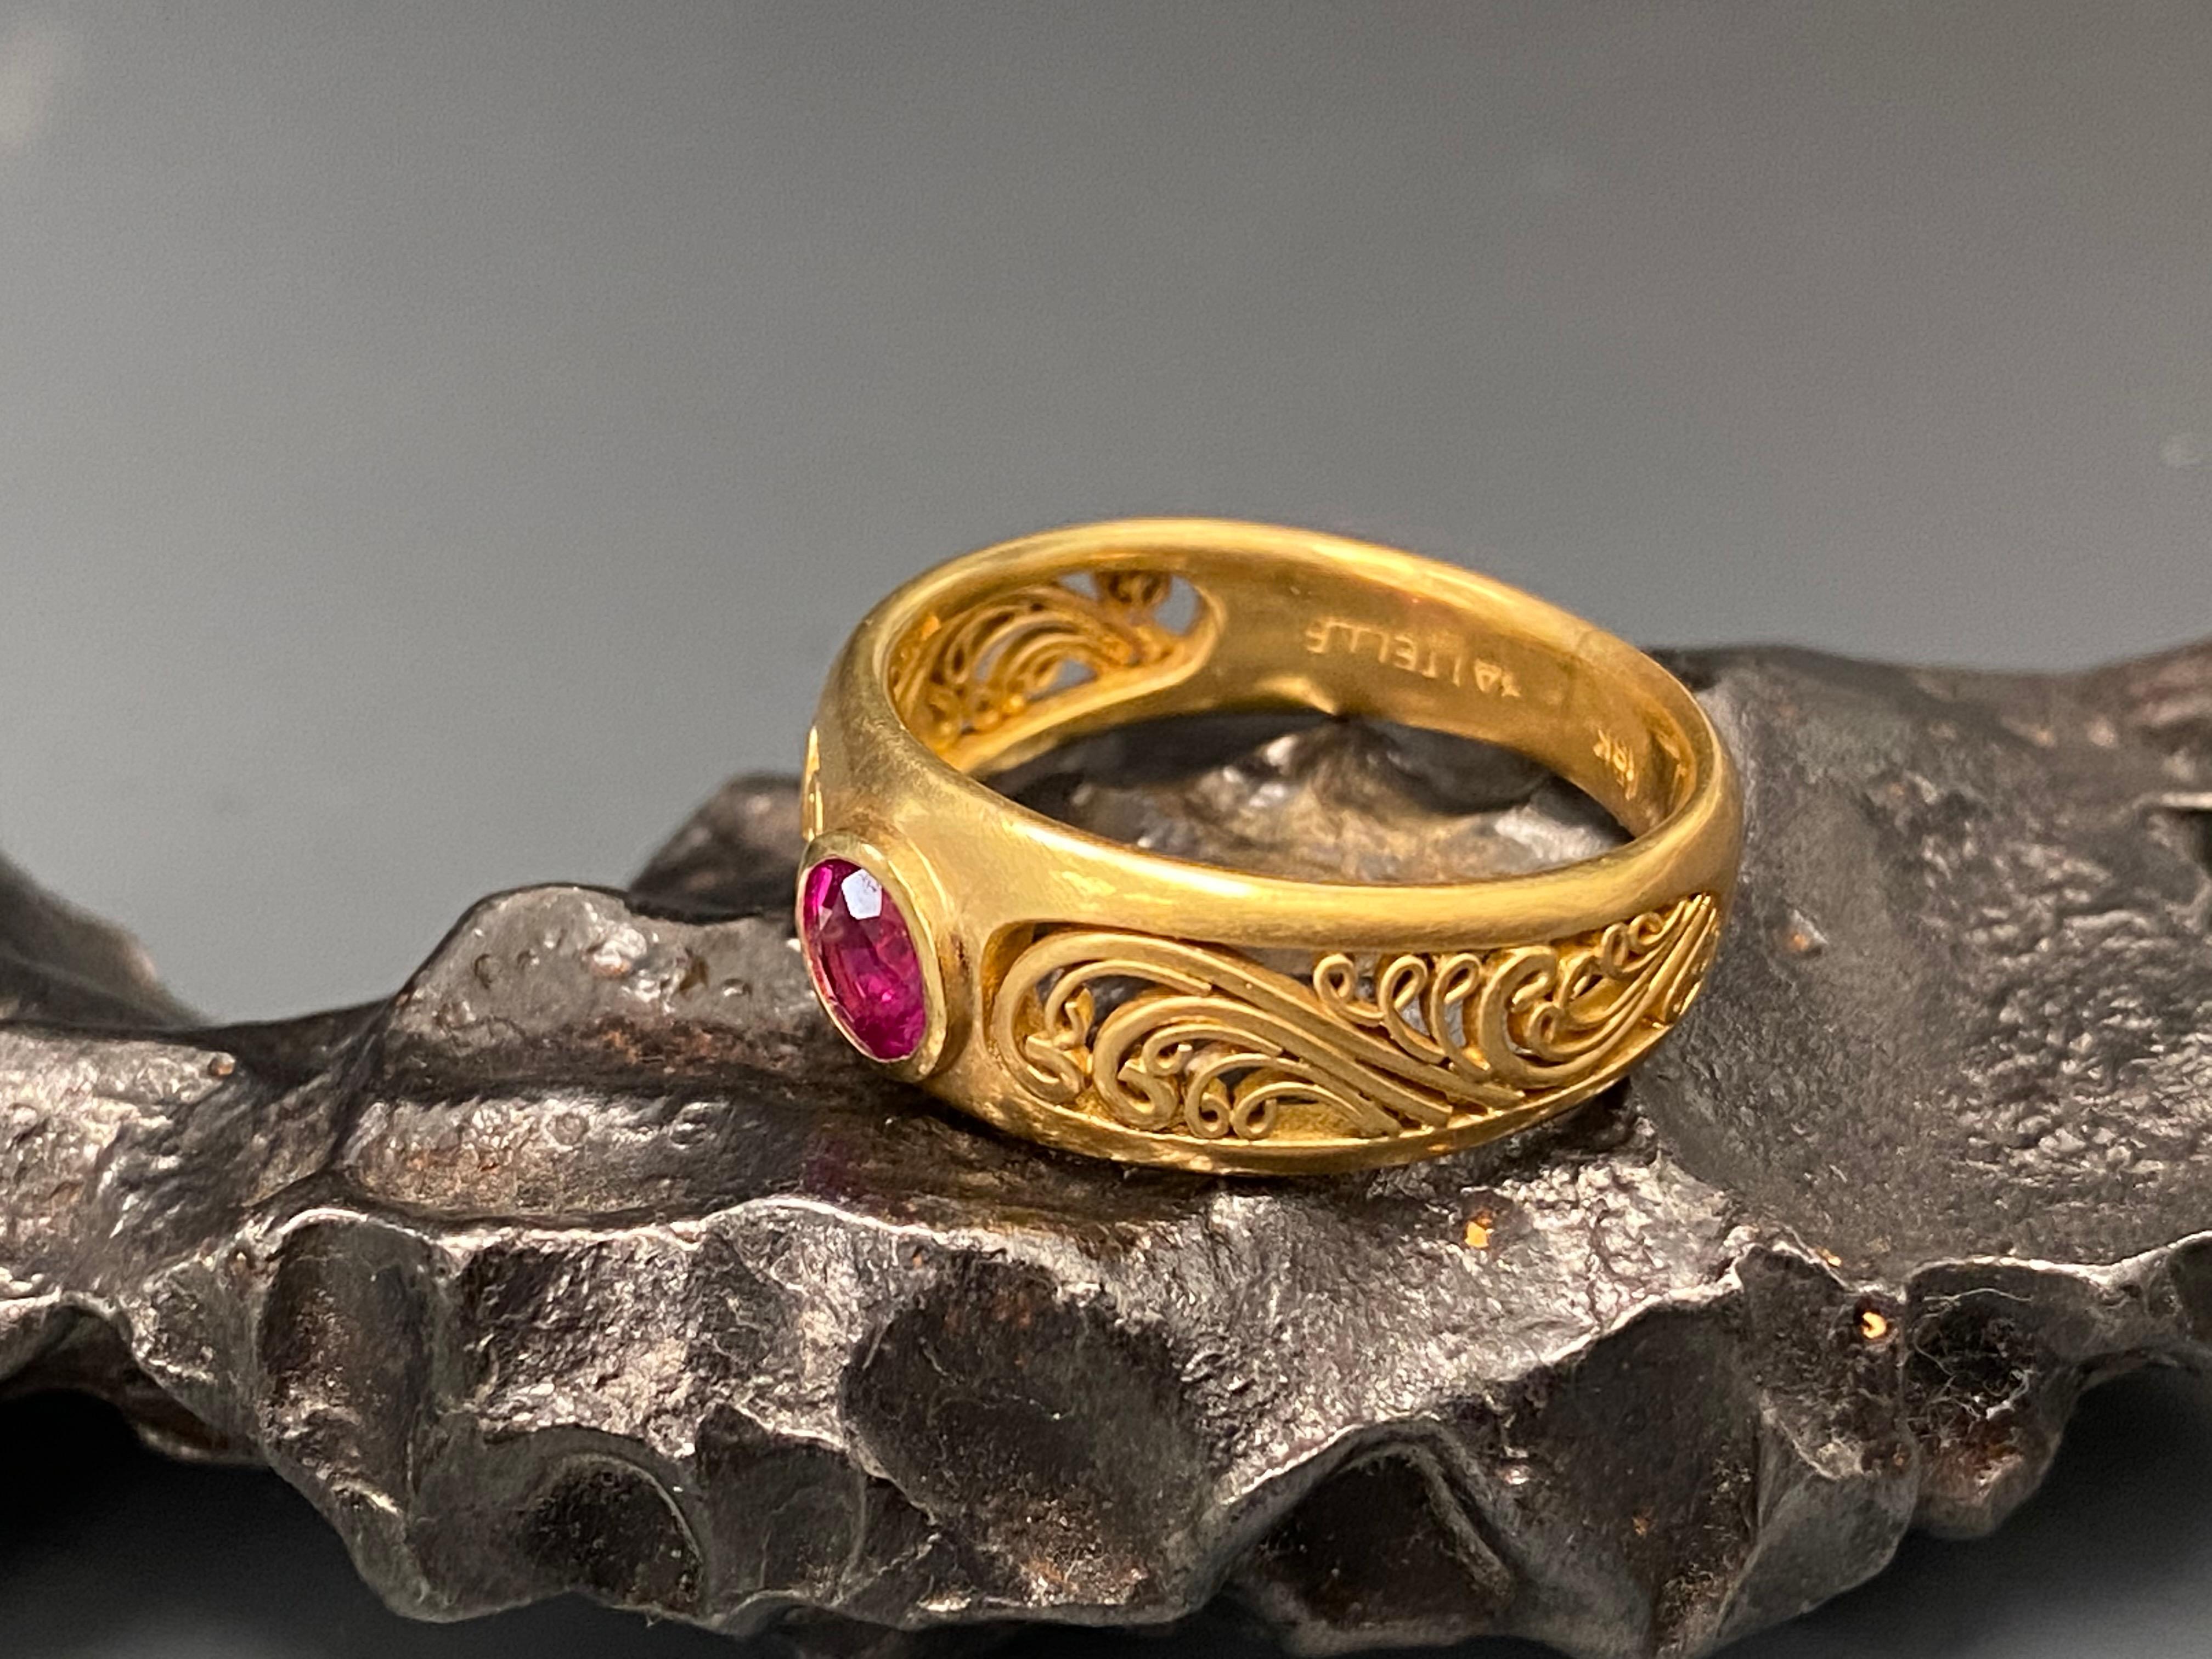 Steven Battelle 0.6 Carat Ruby 18K Wirework Ring Gold In New Condition For Sale In Soquel, CA